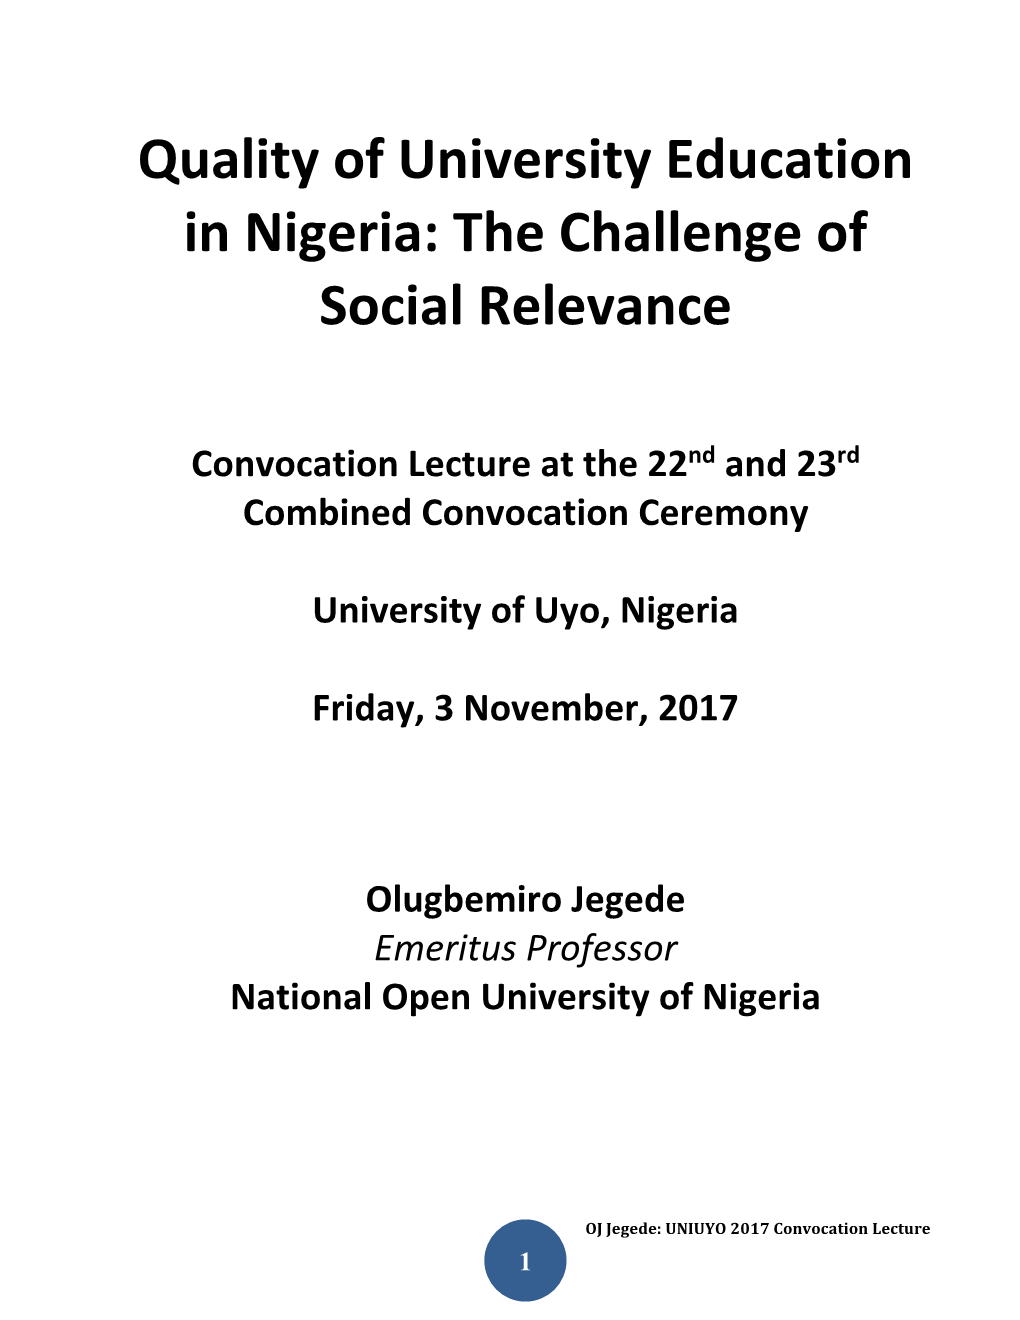 Quality of University Education in Nigeria: the Challenge of Social Relevance